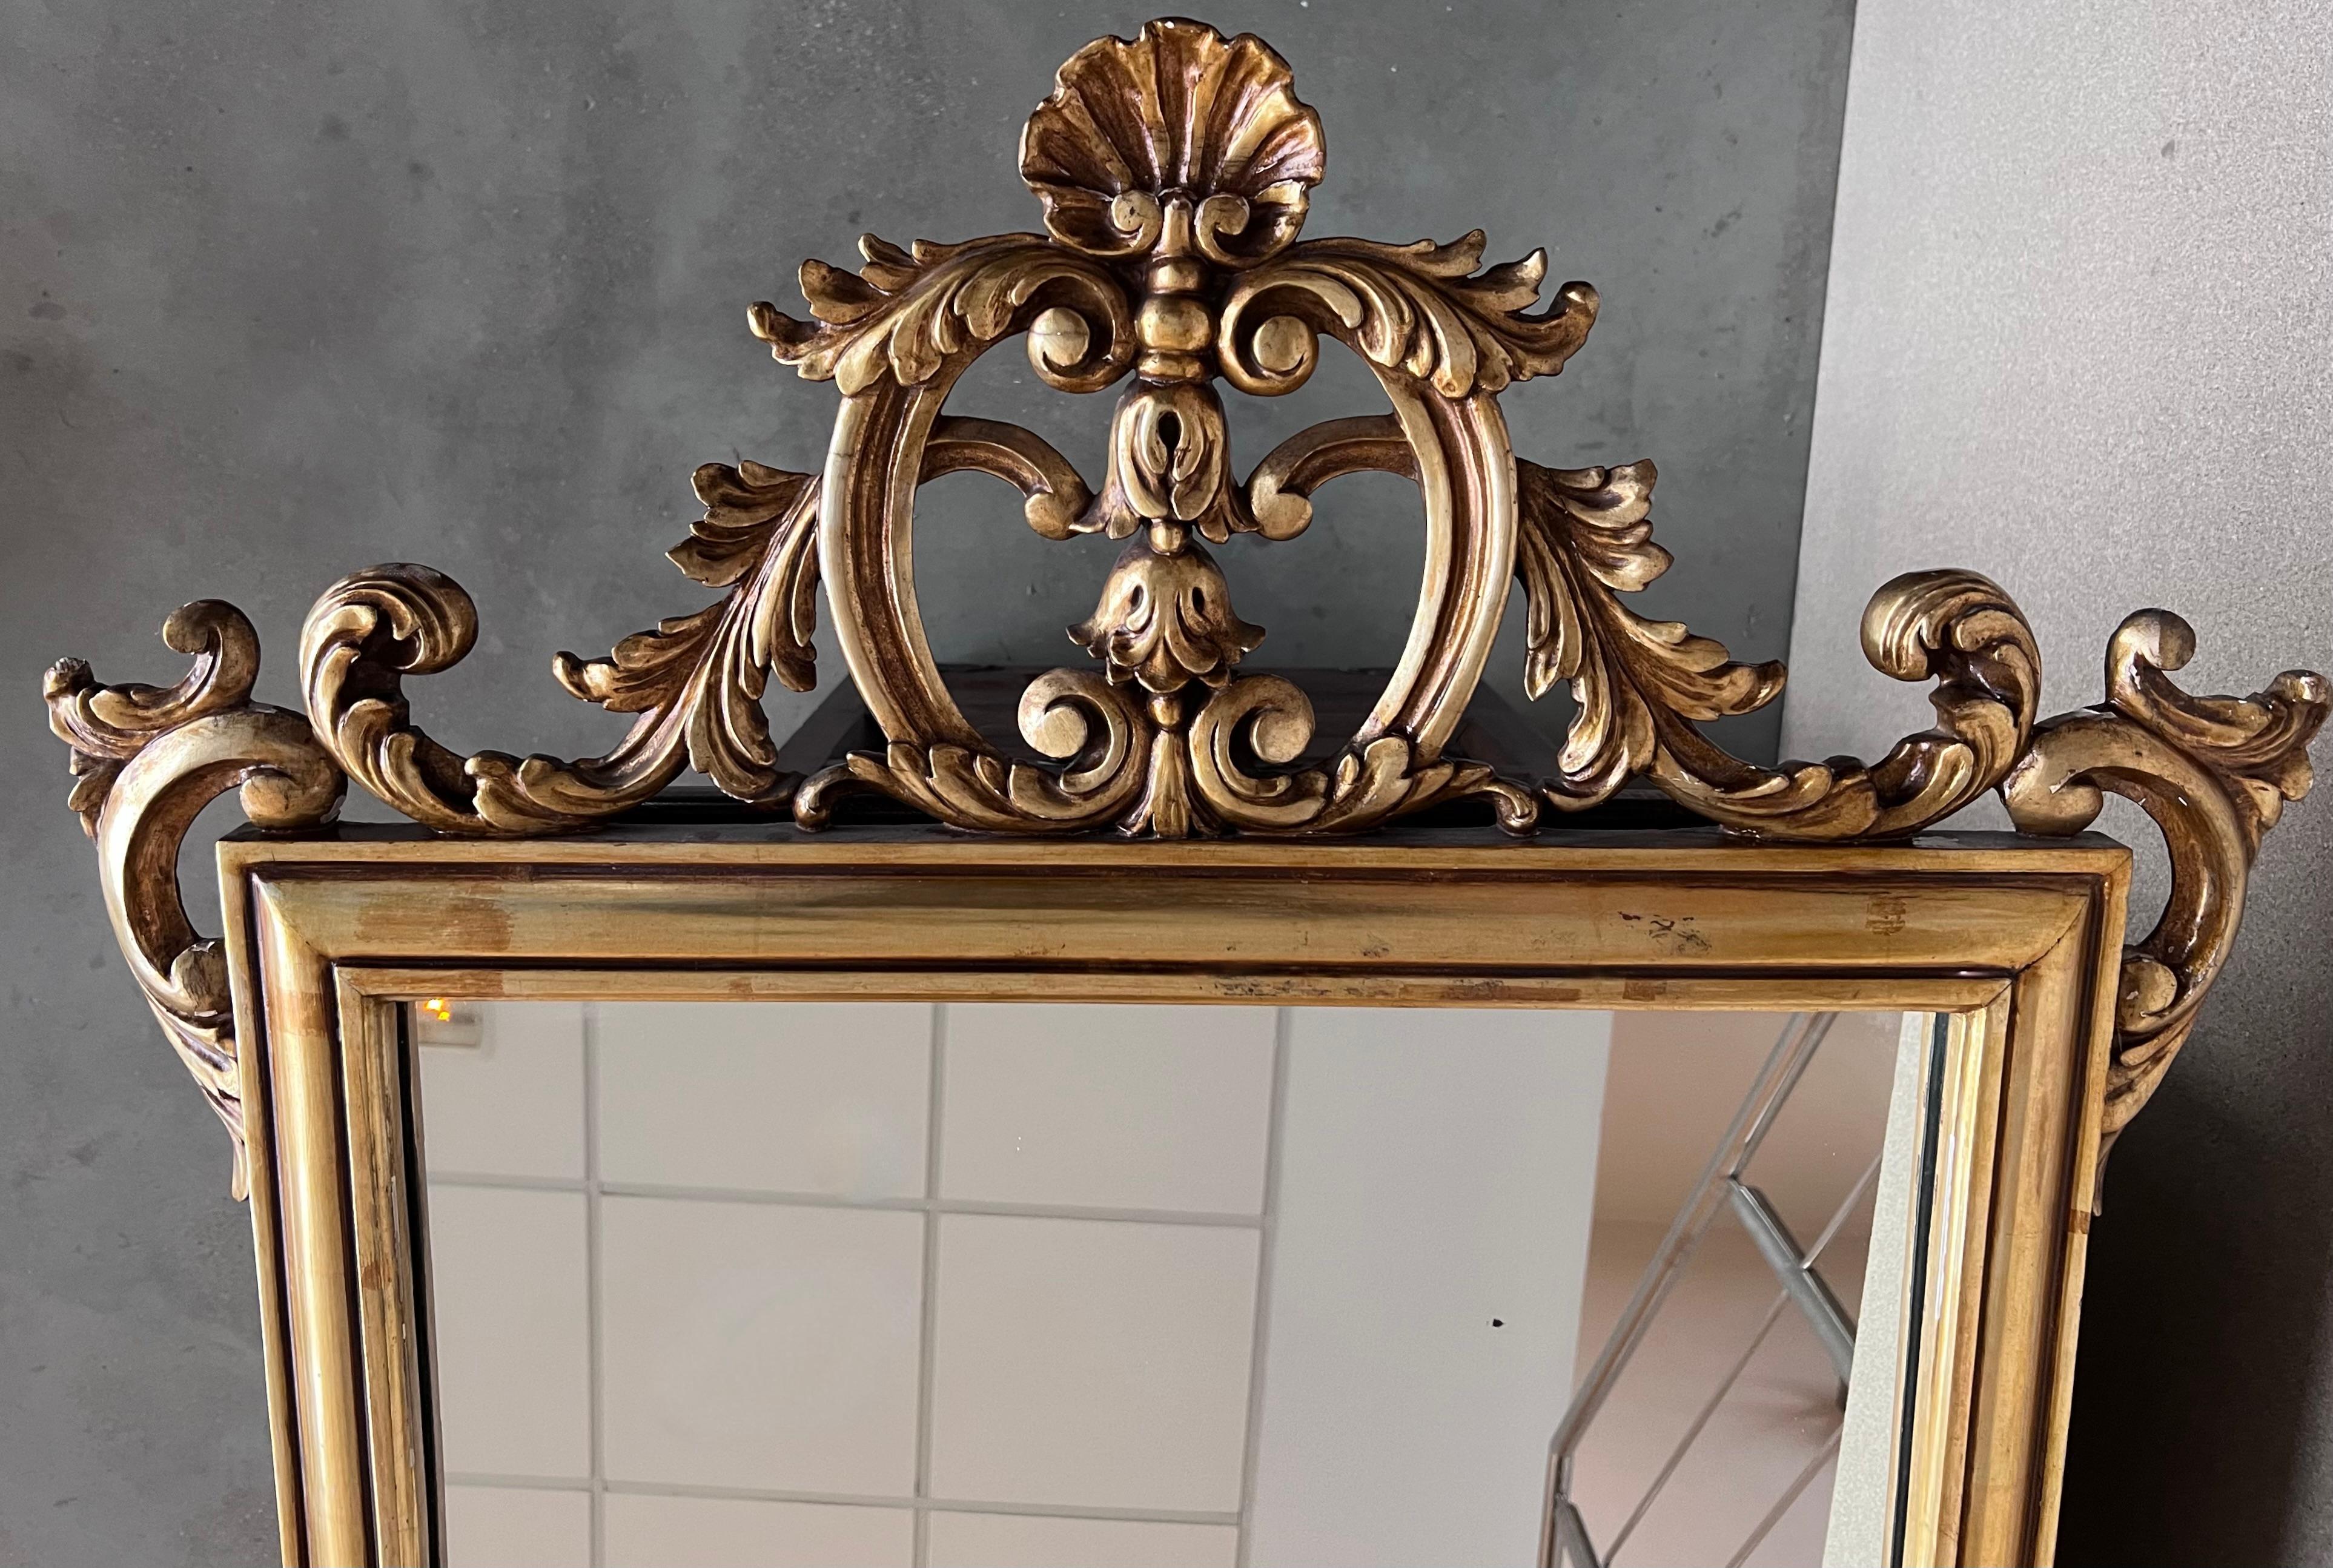 Hand-Carved 20th French Empire Period Carved Gilt Wood Rectangular Mirror with Crest For Sale